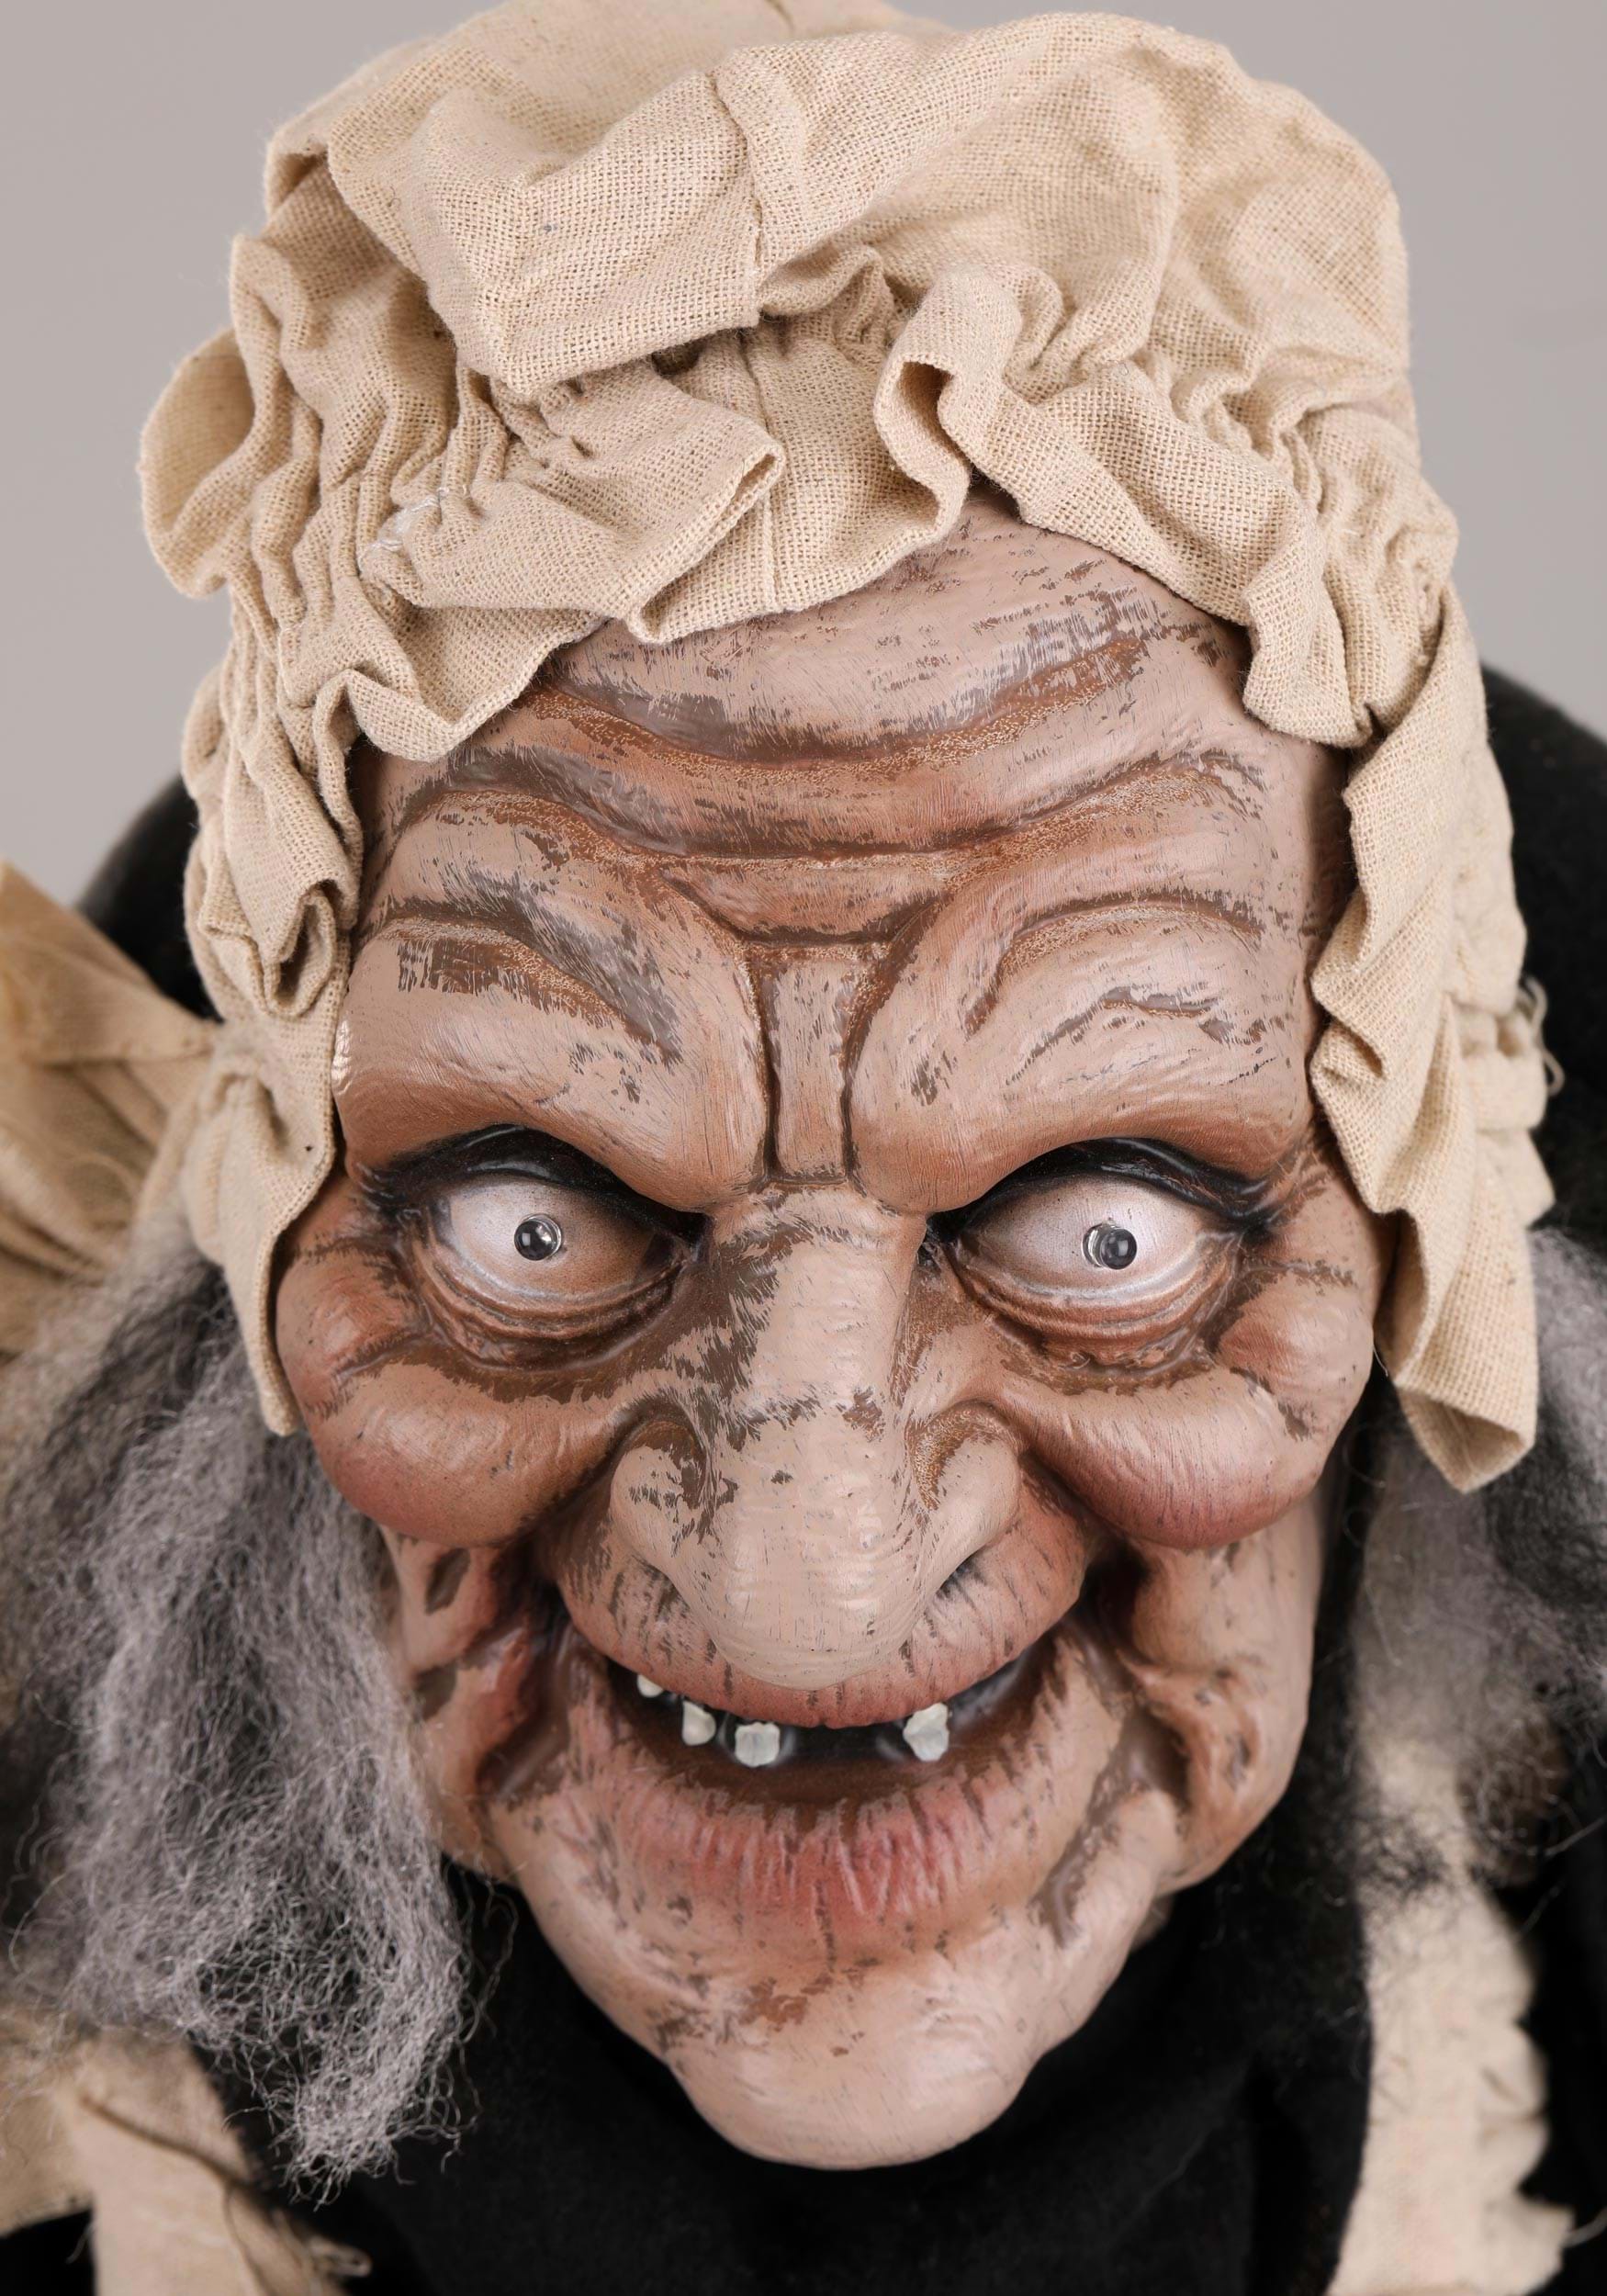 https://images.fun.com/products/74114/2-1-196348/5ft-animated-greeter-old-lady-hag-decoration-alt-1.jpg